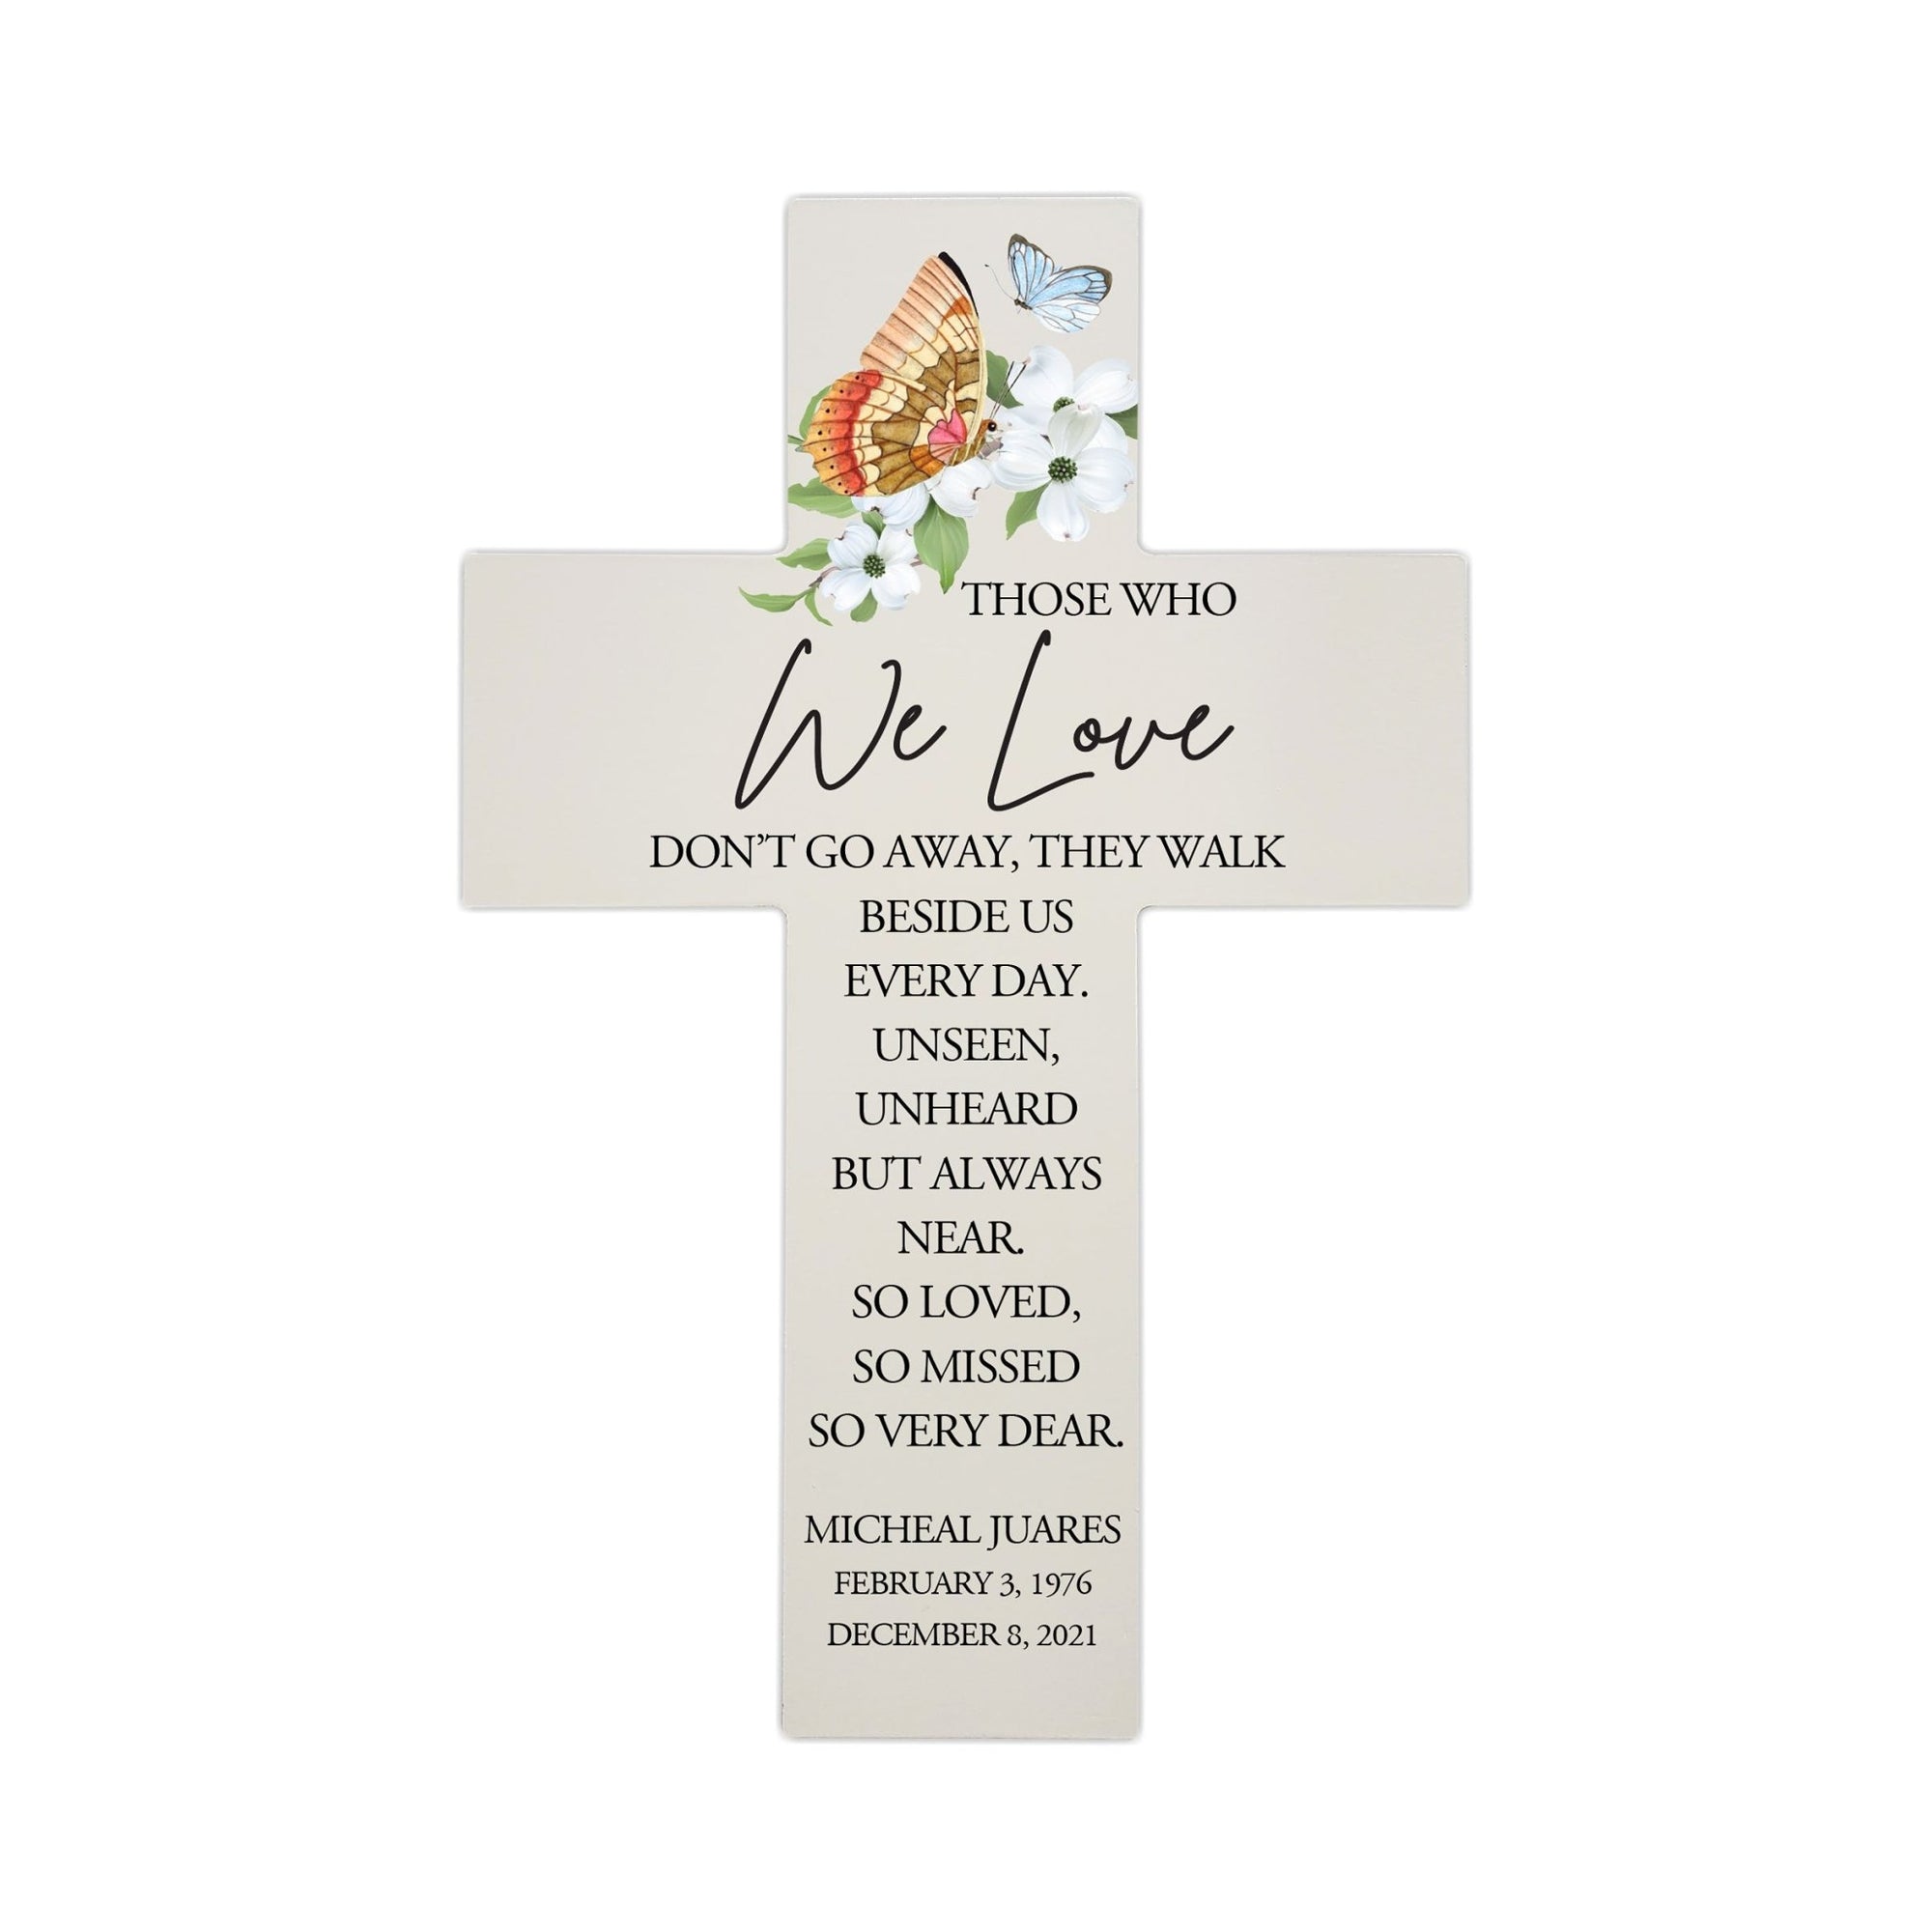 Personalized Butterfly Memorial Bereavement Wall Cross For Loss of Loved One Those Who We Love (Butterfly) Quote 14 x 9.25 Those Who We Love Don't Go Away, They Walk Beside Us Everyday - LifeSong Milestones